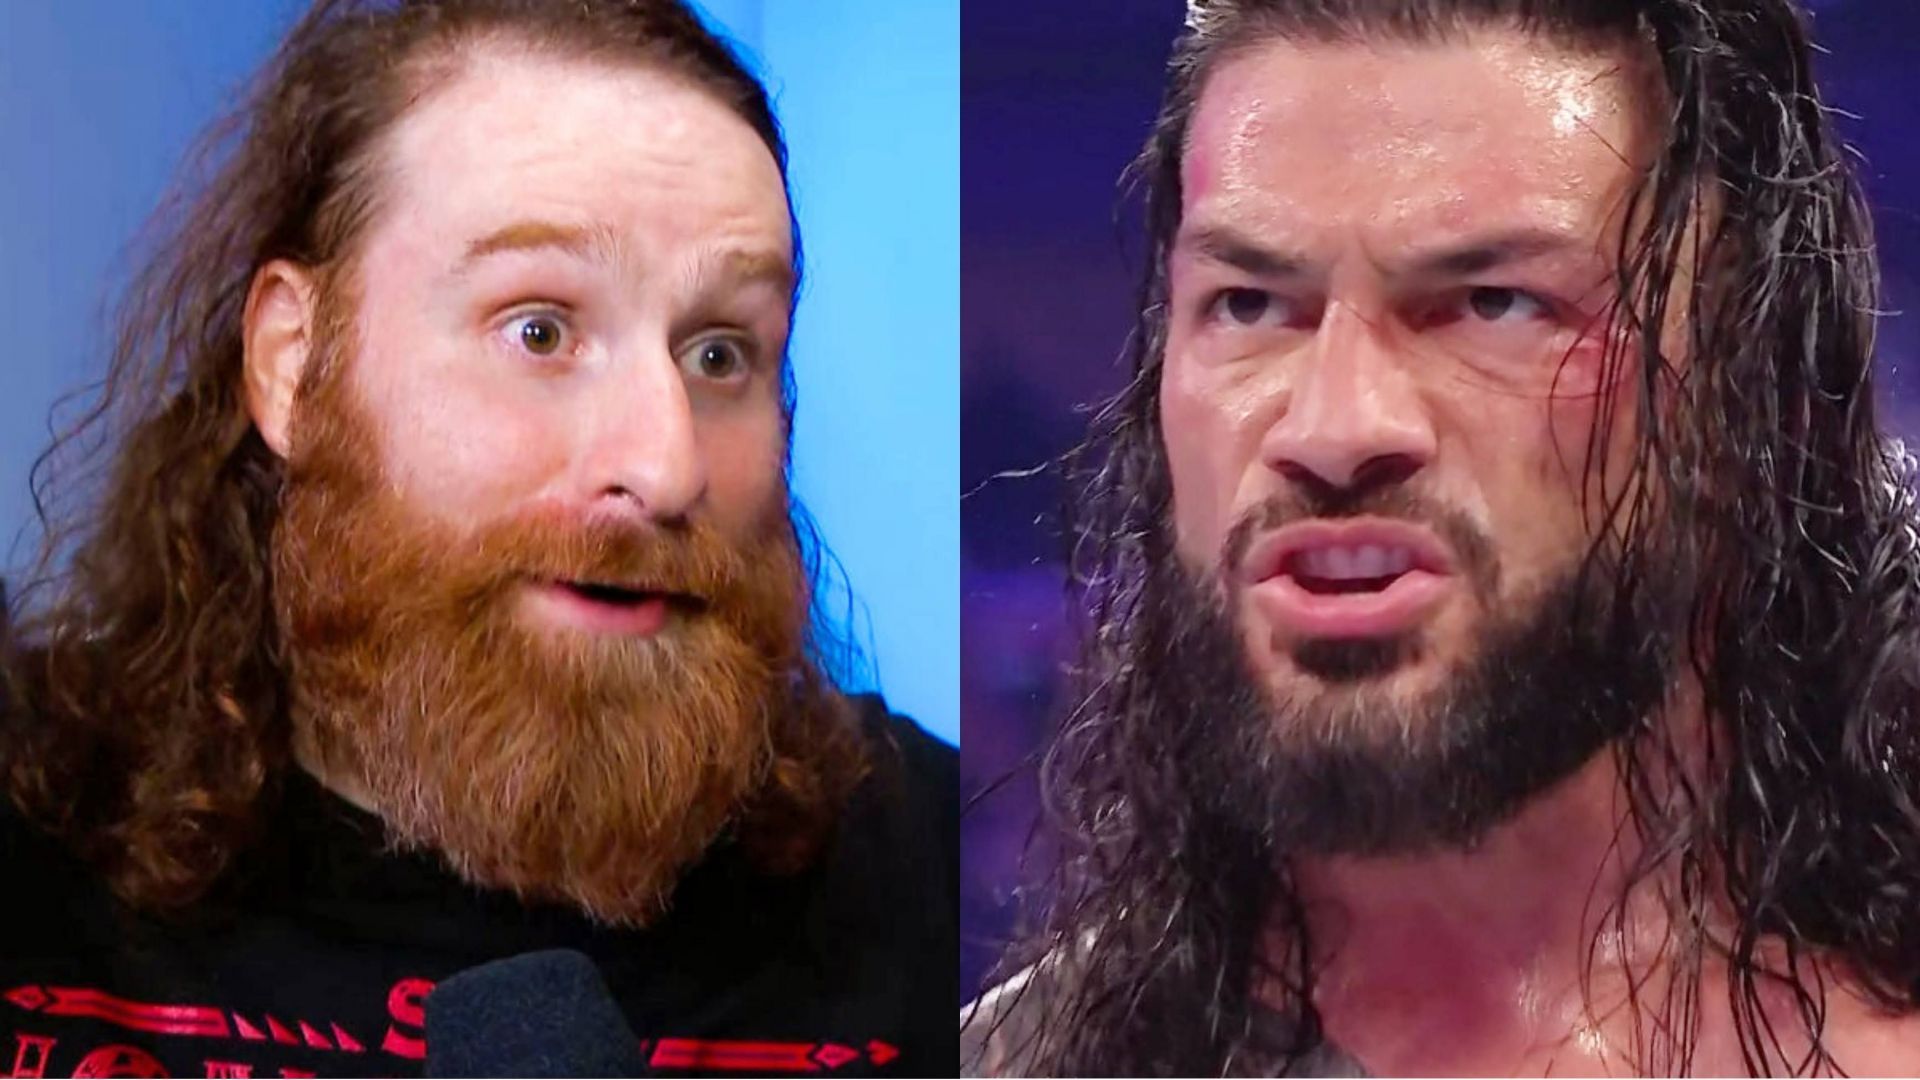 Sami Zayn (left) and Undisputed WWE Universal Champion Roman Reigns (right)